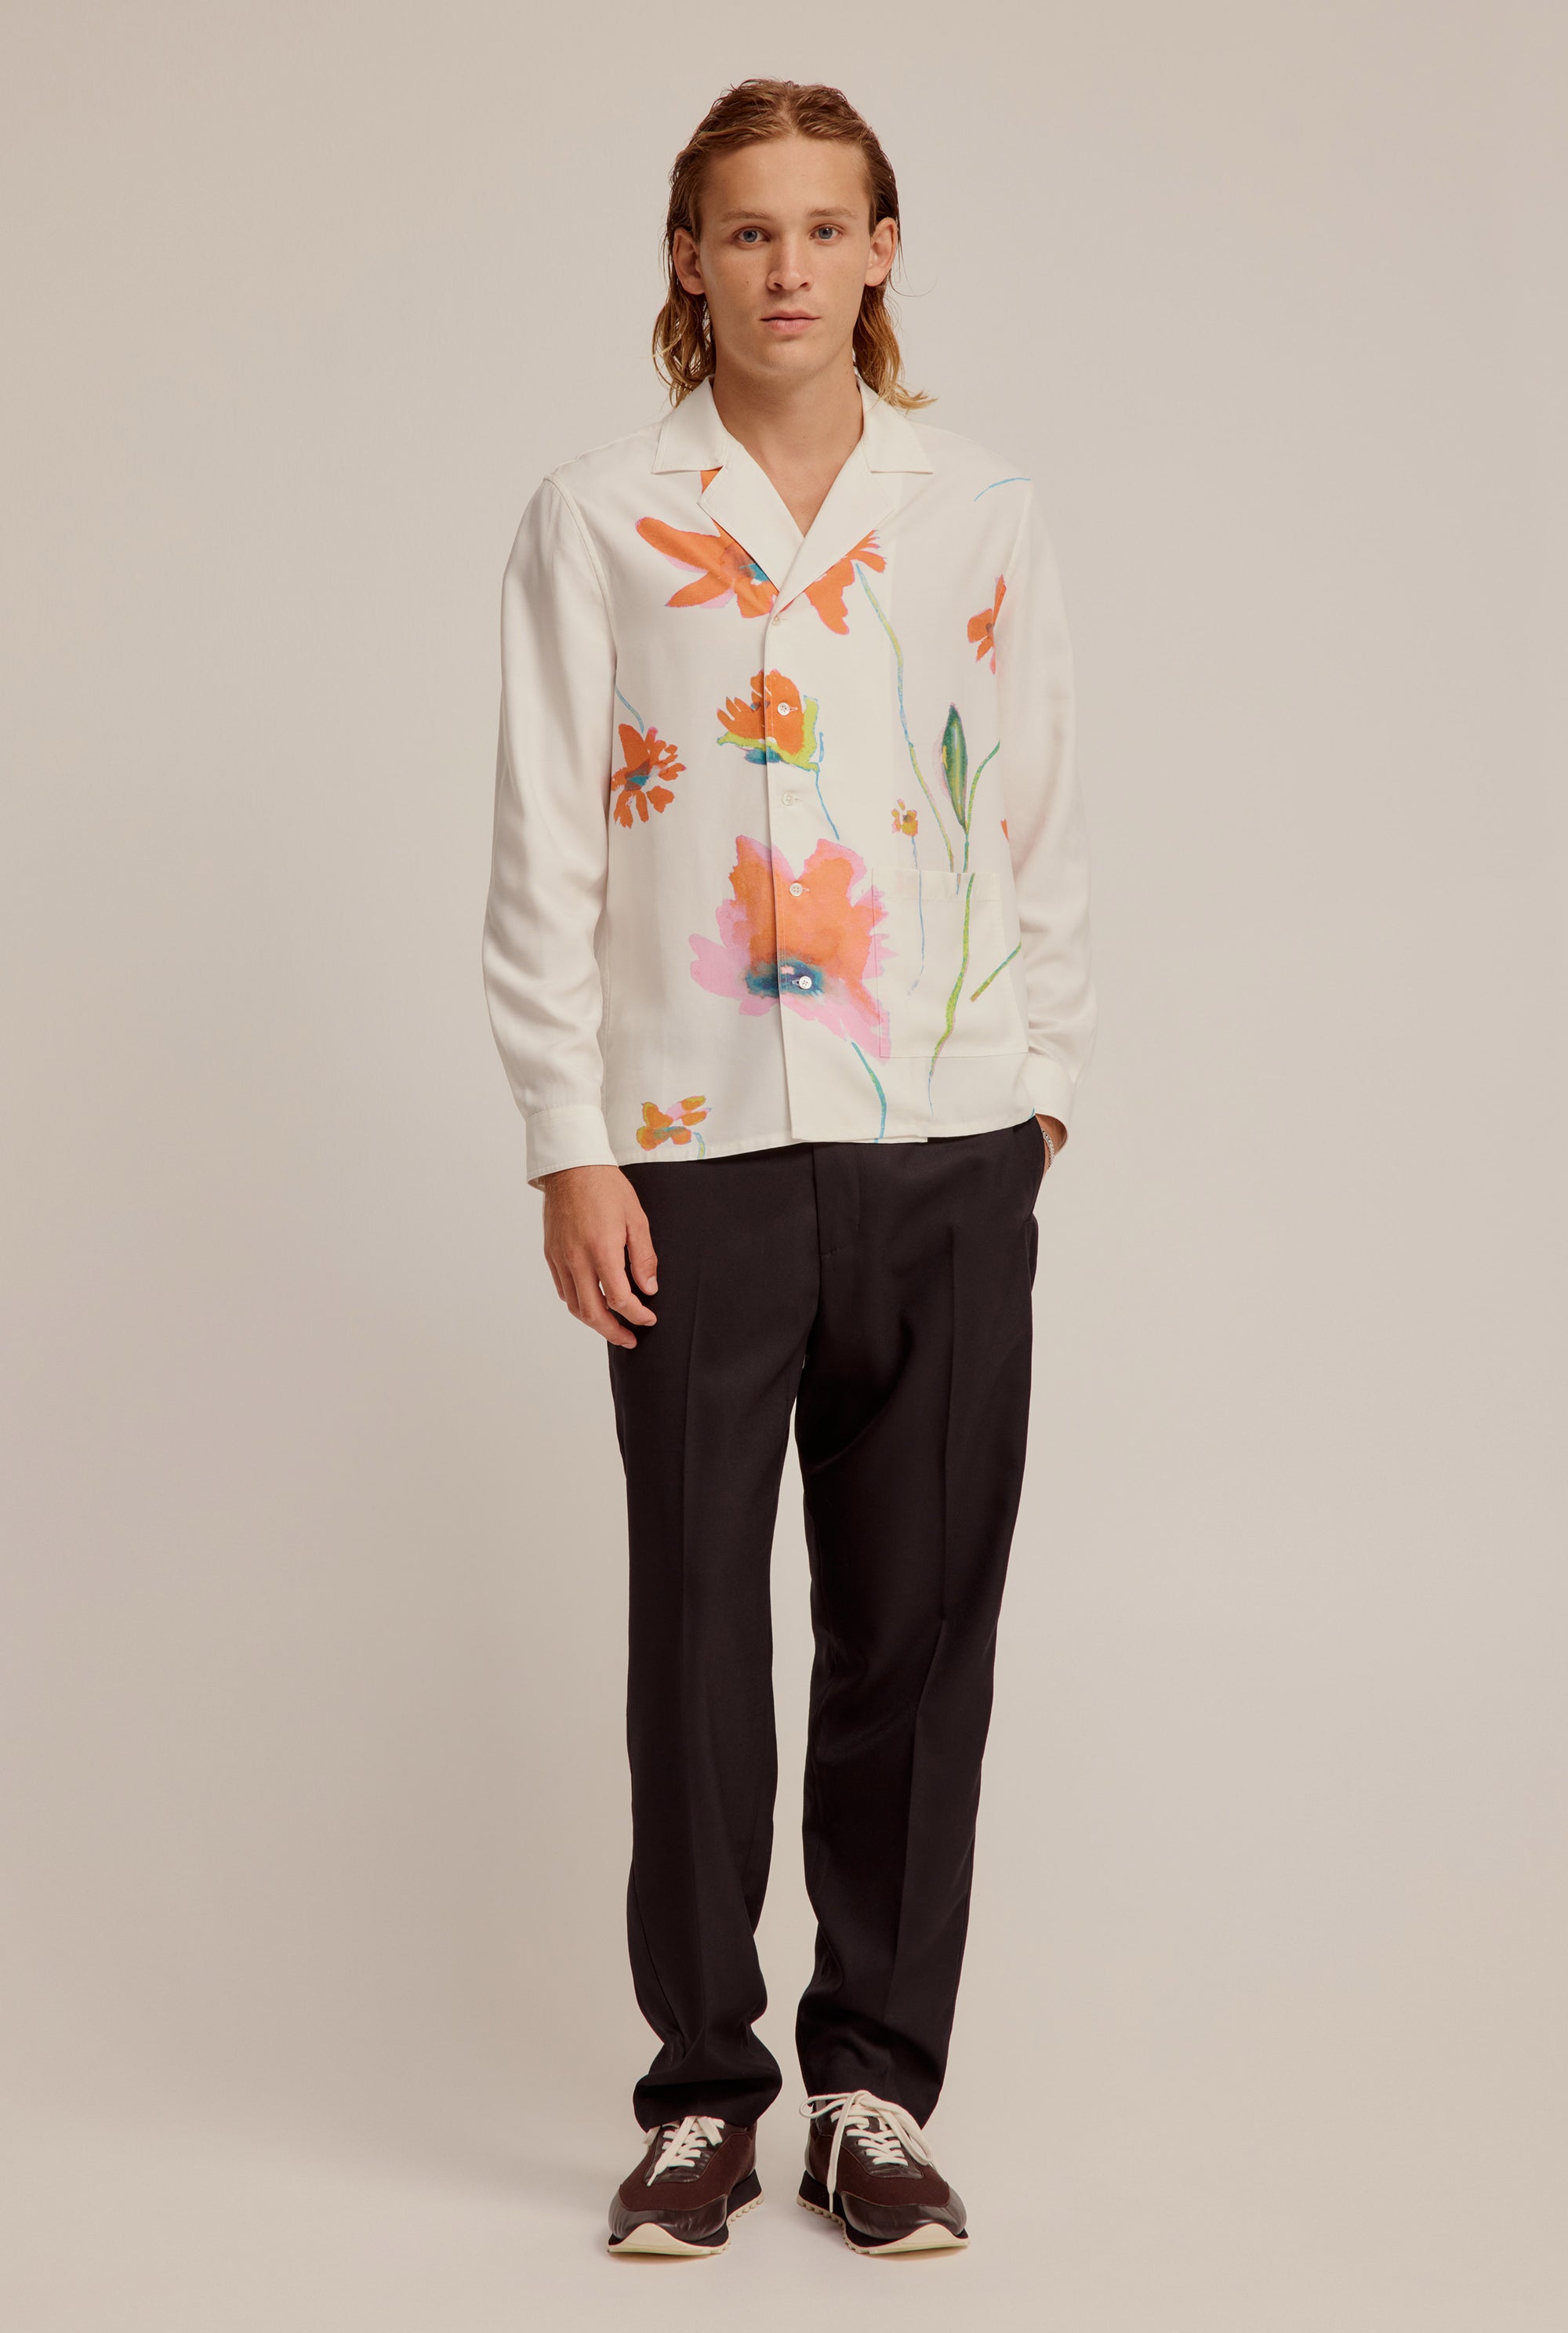 Printed Long Sleeve Double Breasted Shirt - Cream Ikebana Floral